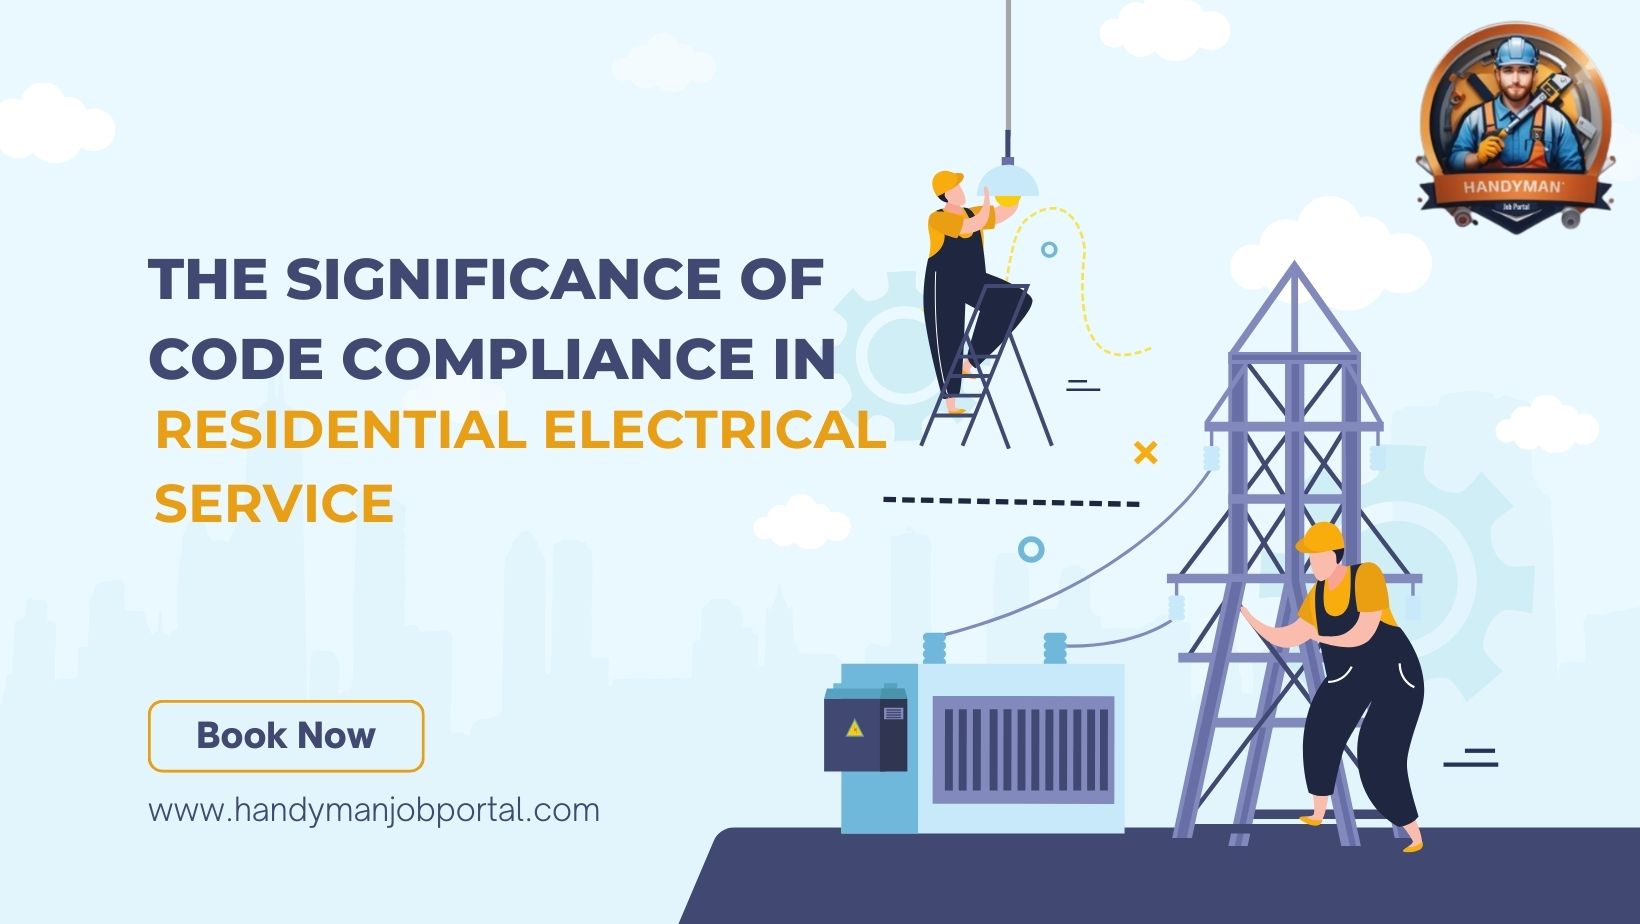 The Significance of Code Compliance in Residential Electrical Service